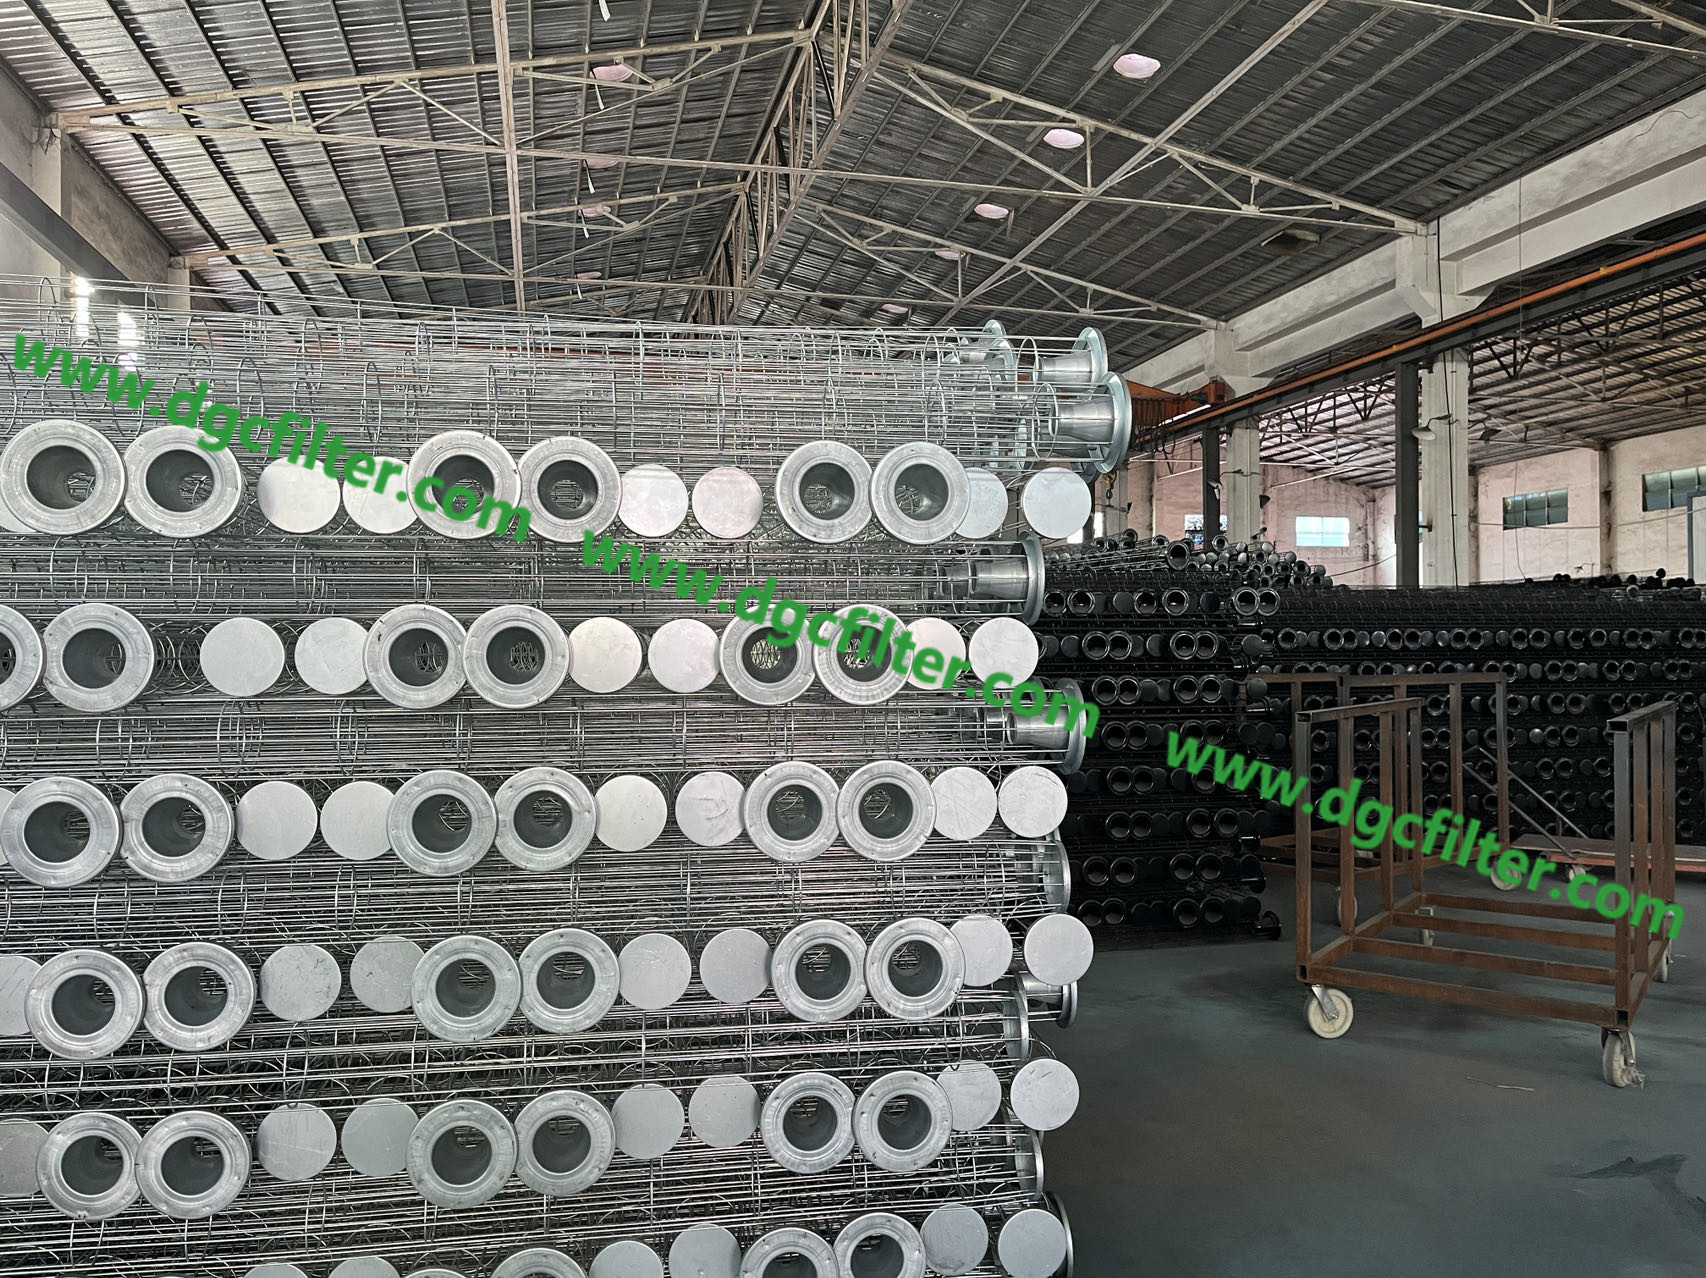 Dust Collector/Baghouse Filter Cages